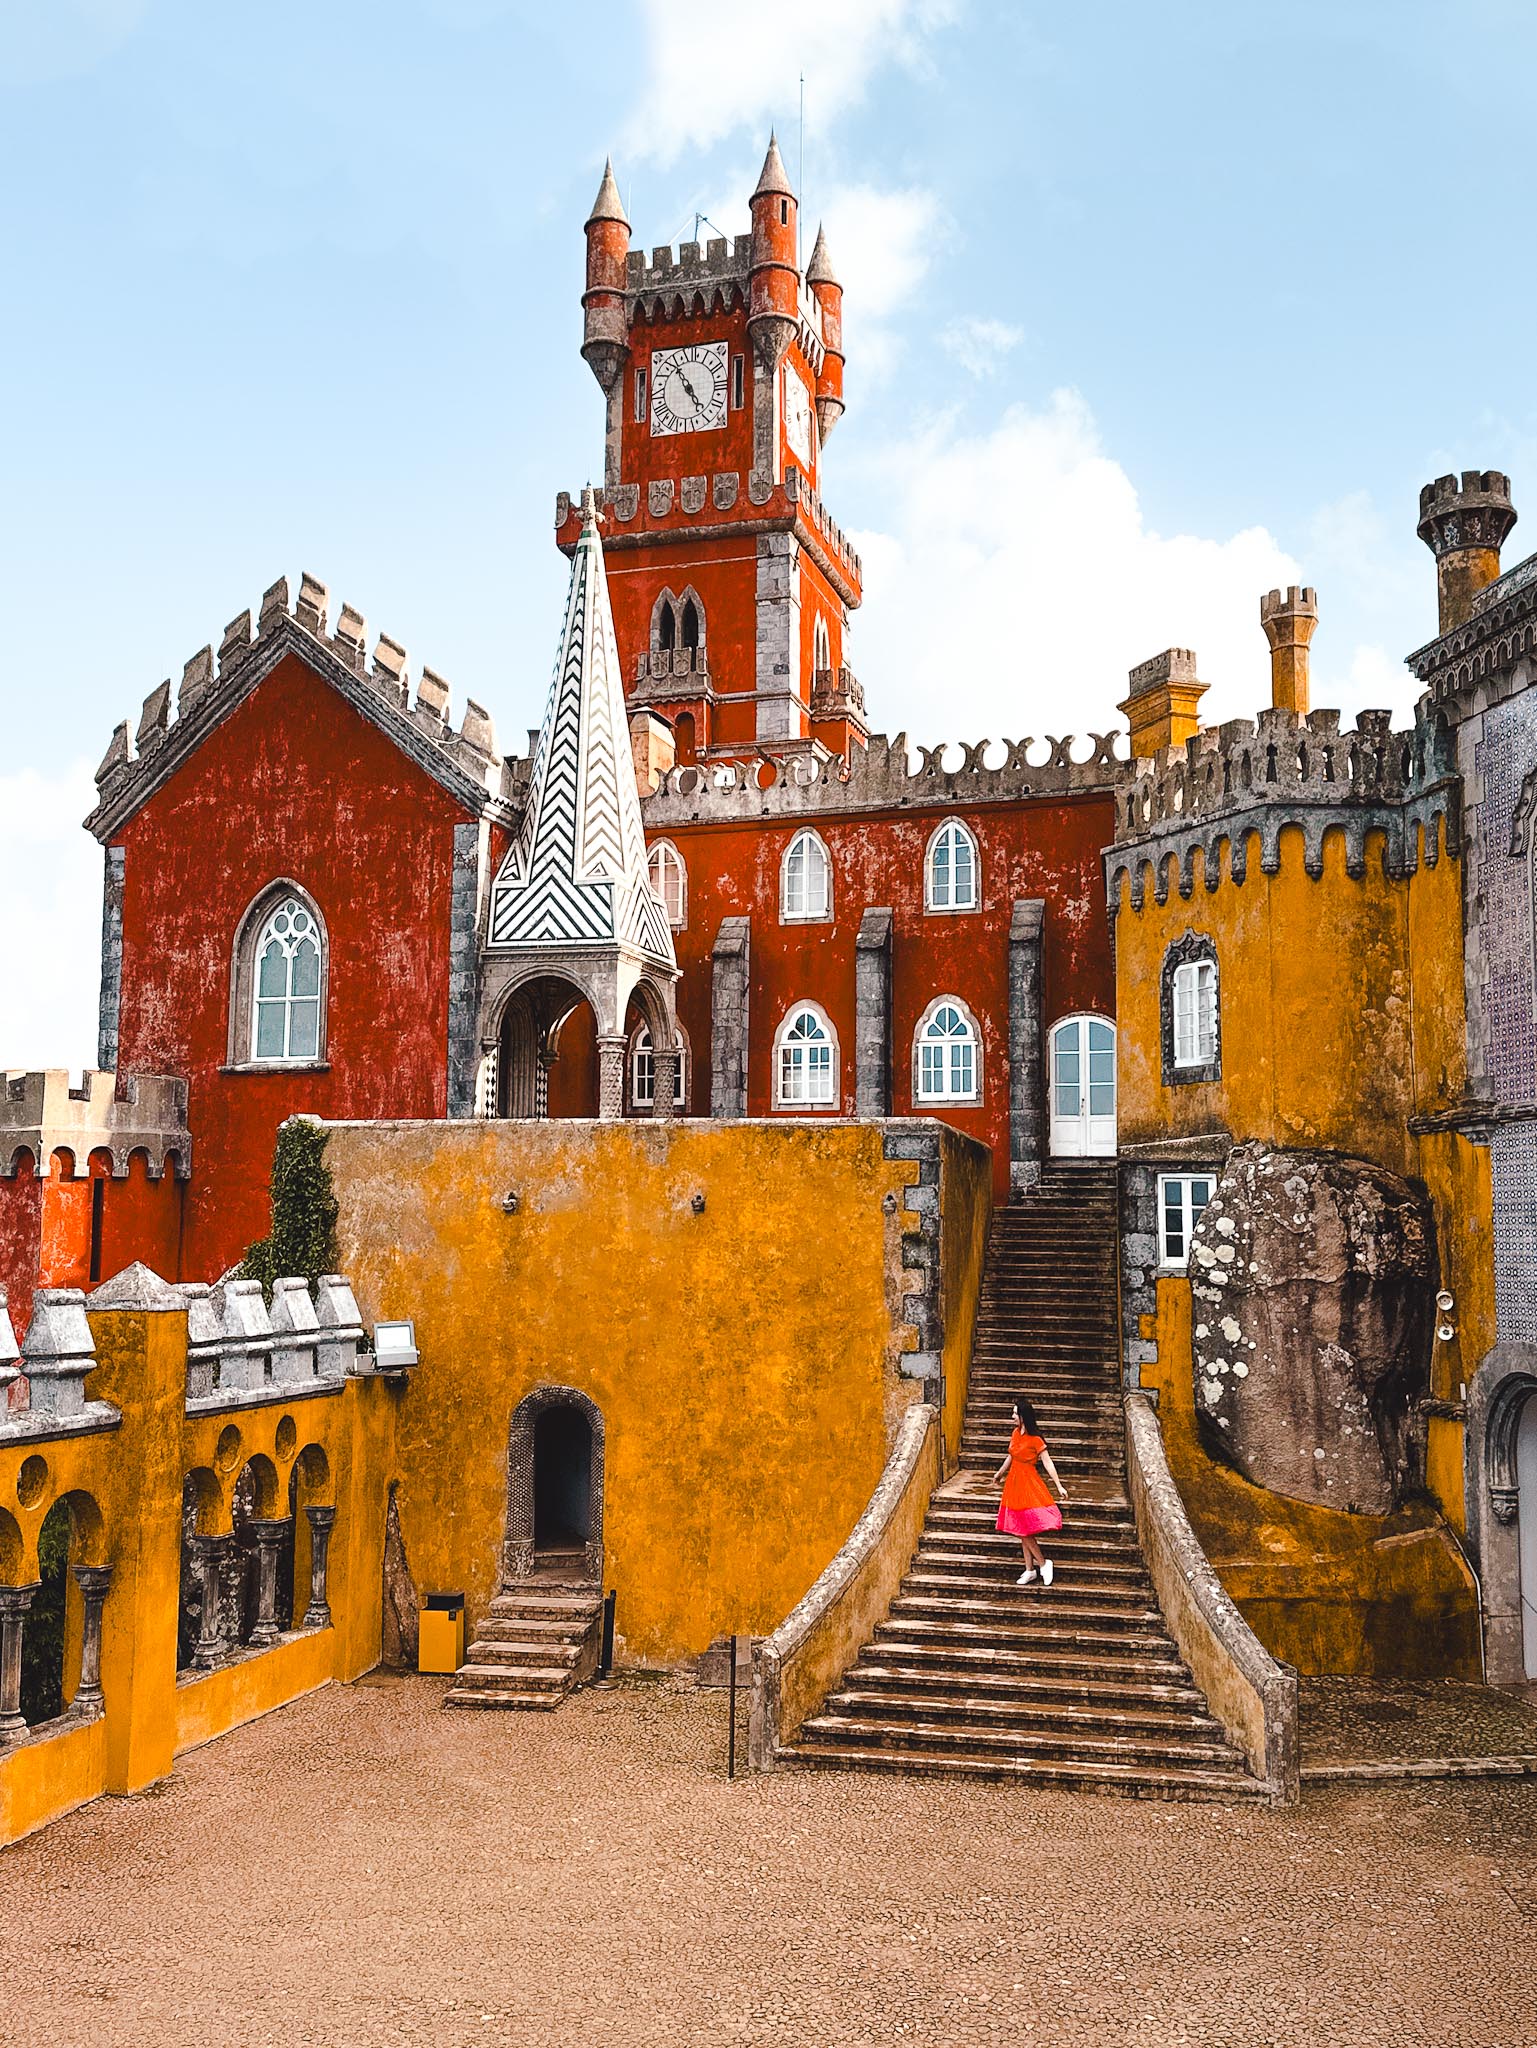 Pena Palace colorful castle in Sintra, Portugal